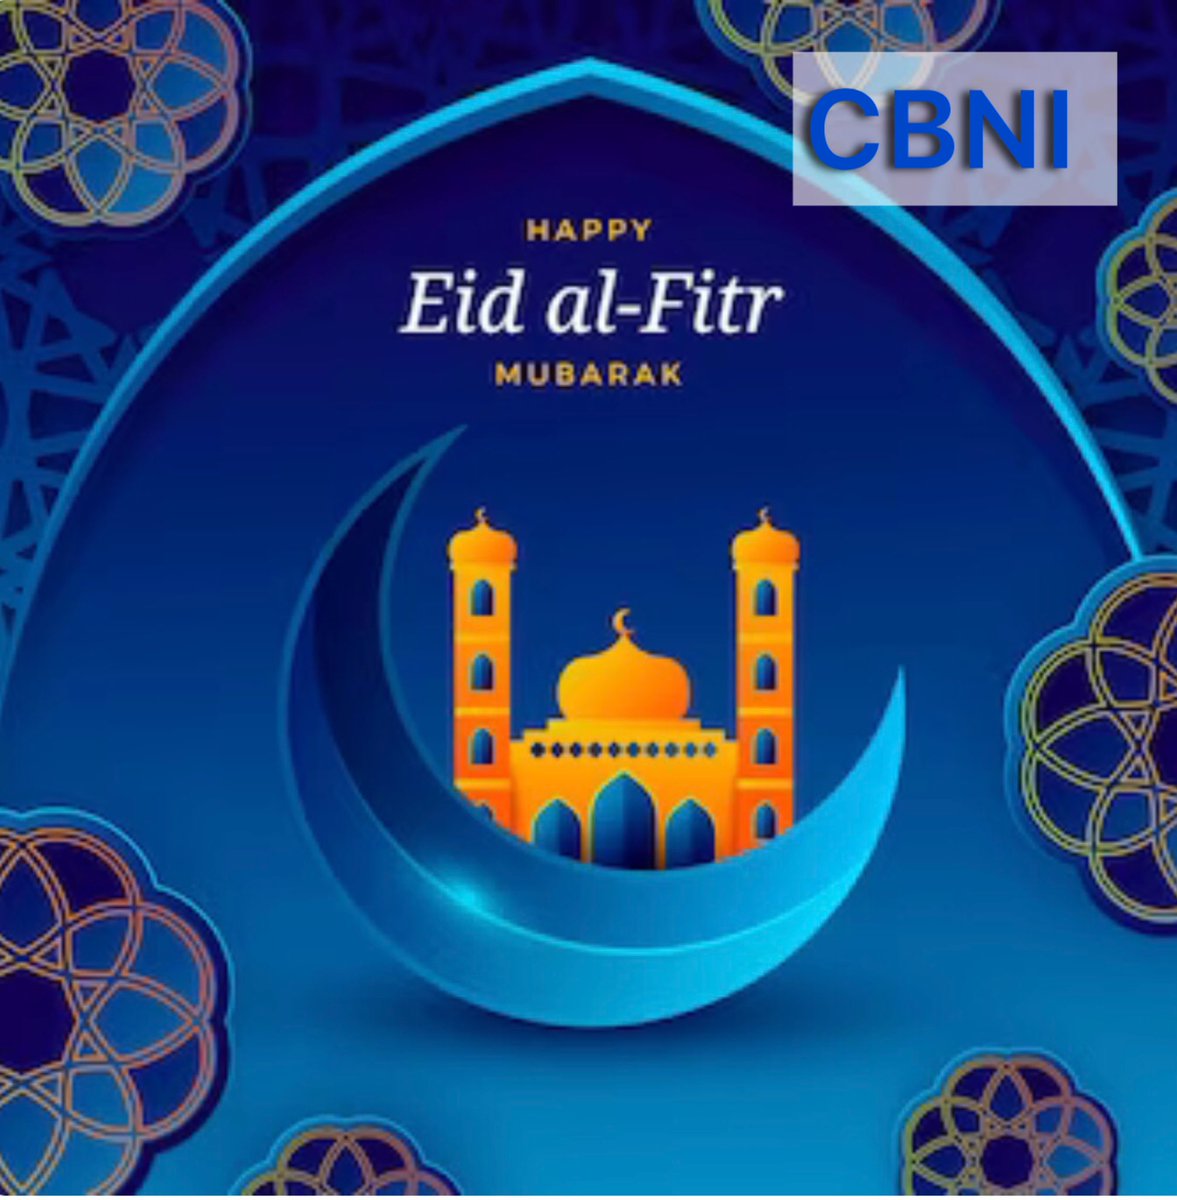 Eid al-Fitr: A Divine Message of Love, Joy, and Compassion As the crescent moon graces the night sky and the aroma of delicacies fills the air, The world gather to celebrate Eid al-Fitr – the festival of breaking the fast.